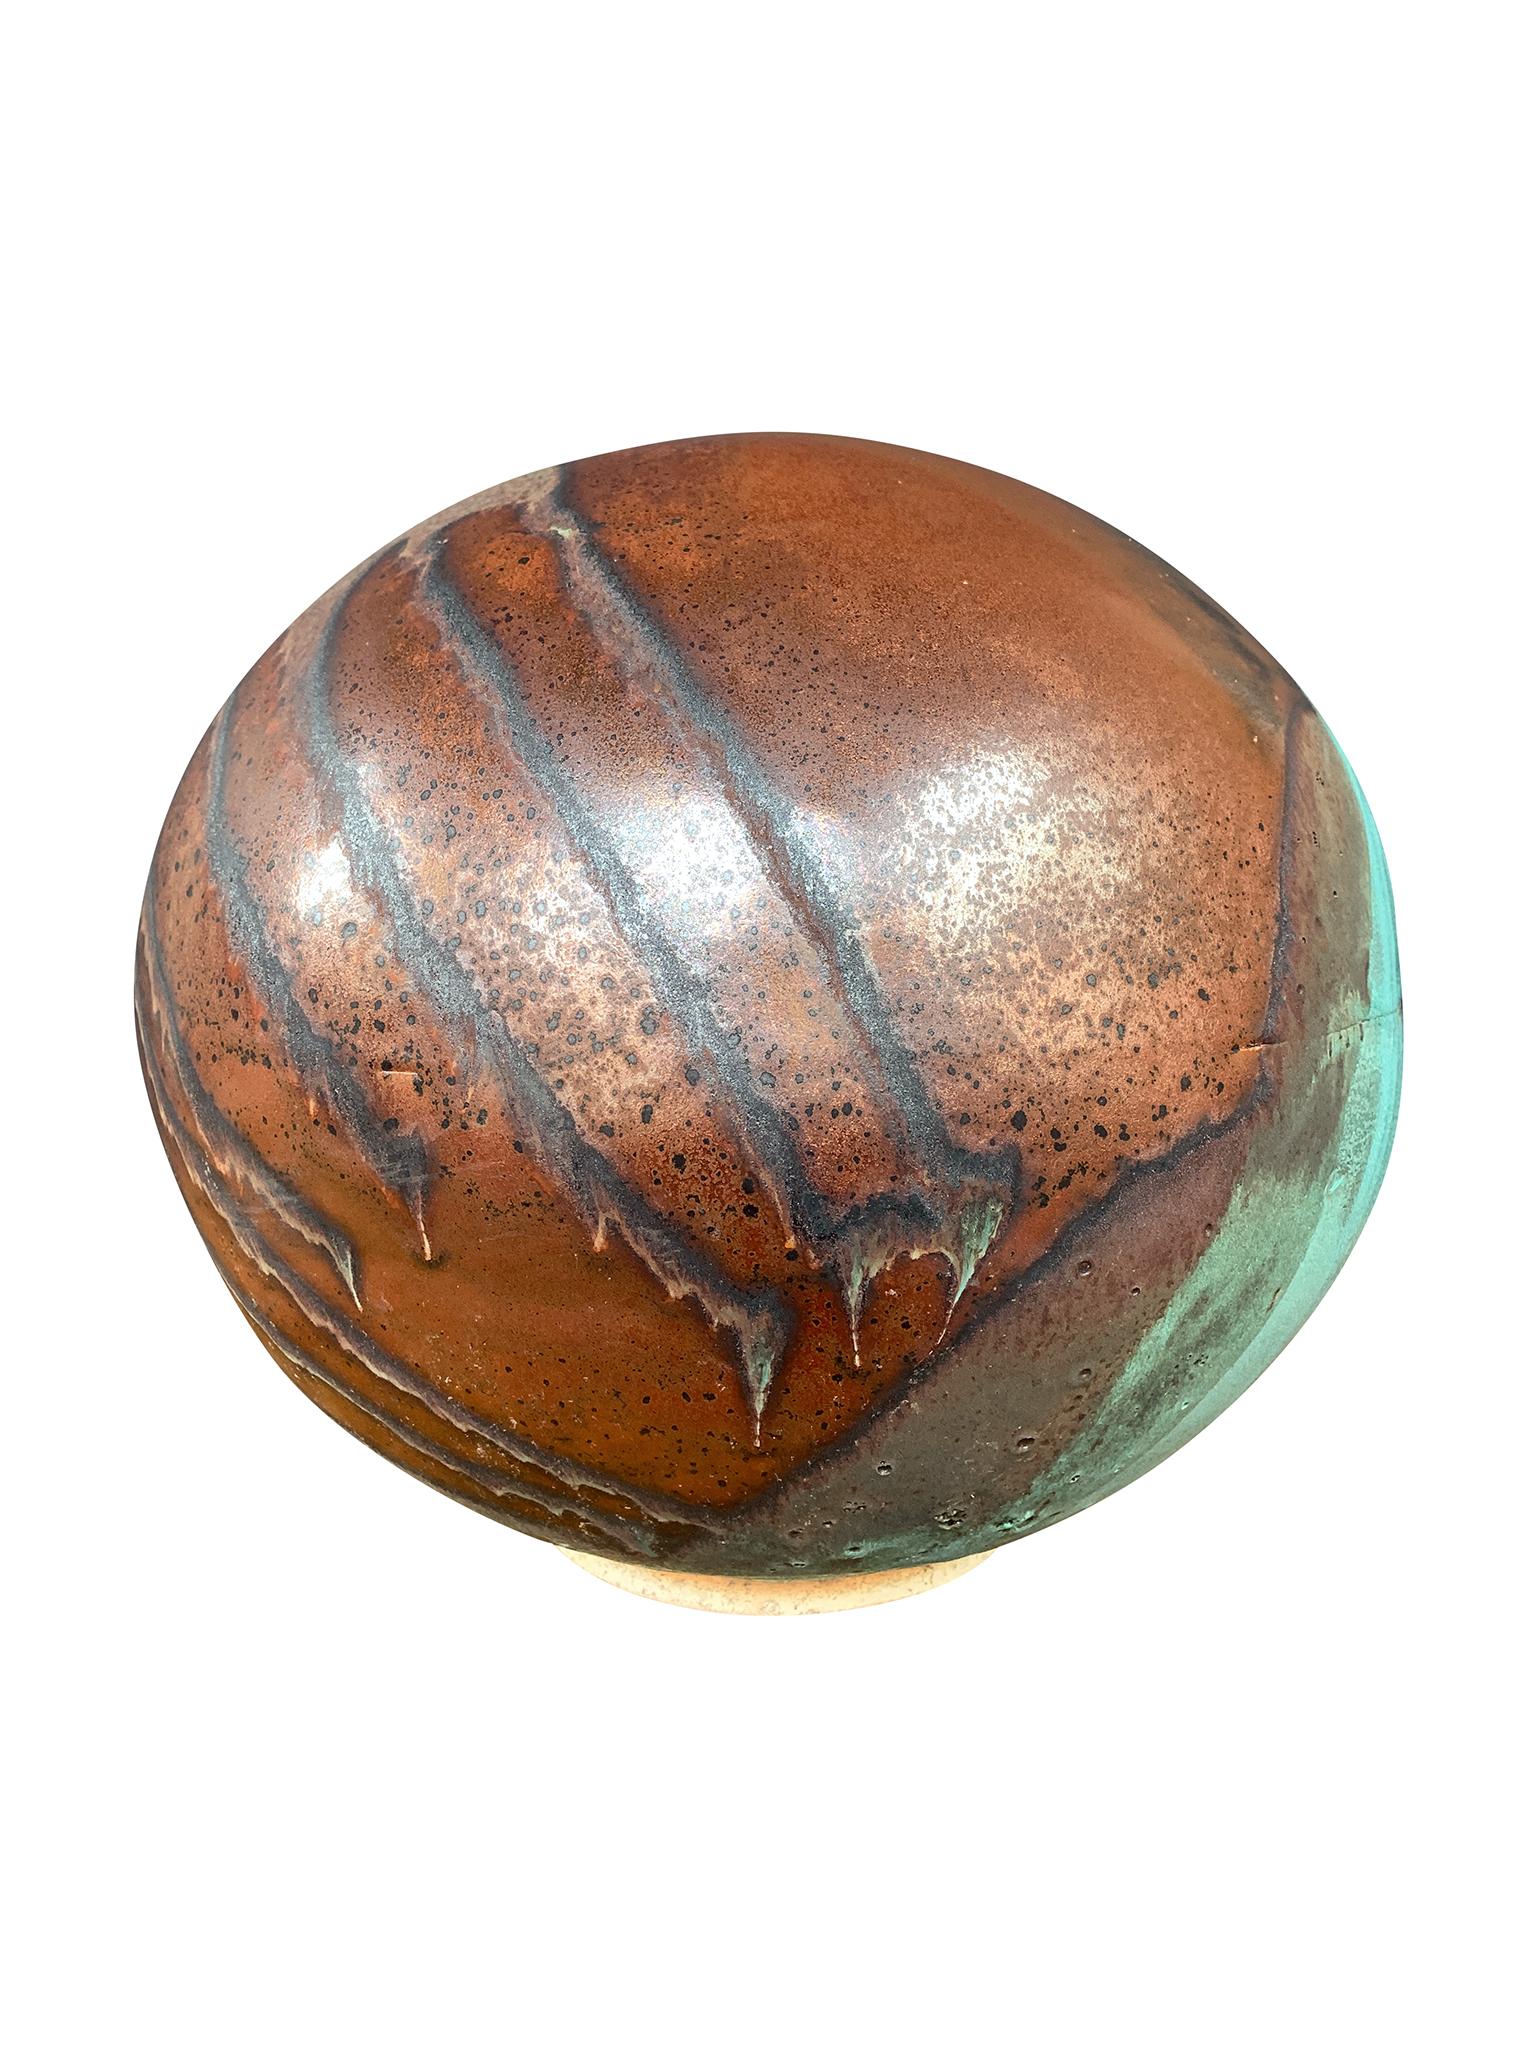 From Thom Lussier's Oxidized Copper Collection - a series of ceramic vessels that stand out for their rich textures and brilliant palette of copper and turquoise. This vessel is spherical in form with a wide opening.

White stoneware, midfire